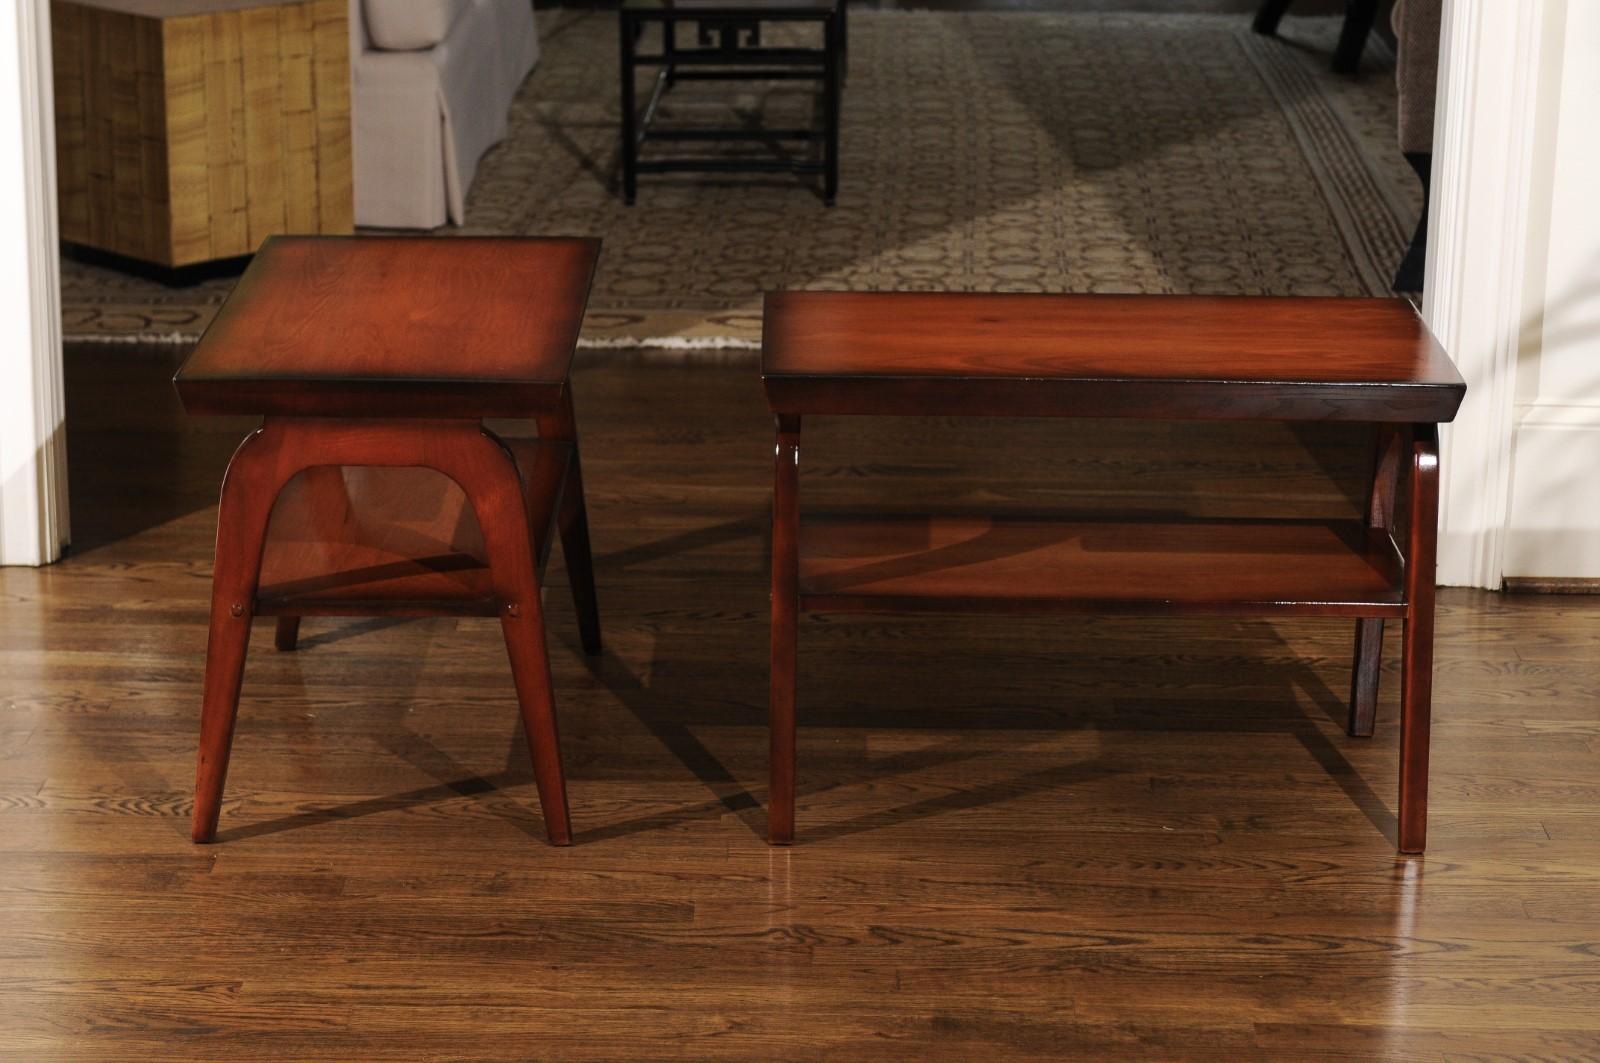 Rare Restored Pair of End Tables by John Wisner for Ficks Reed, circa 1954 For Sale 11